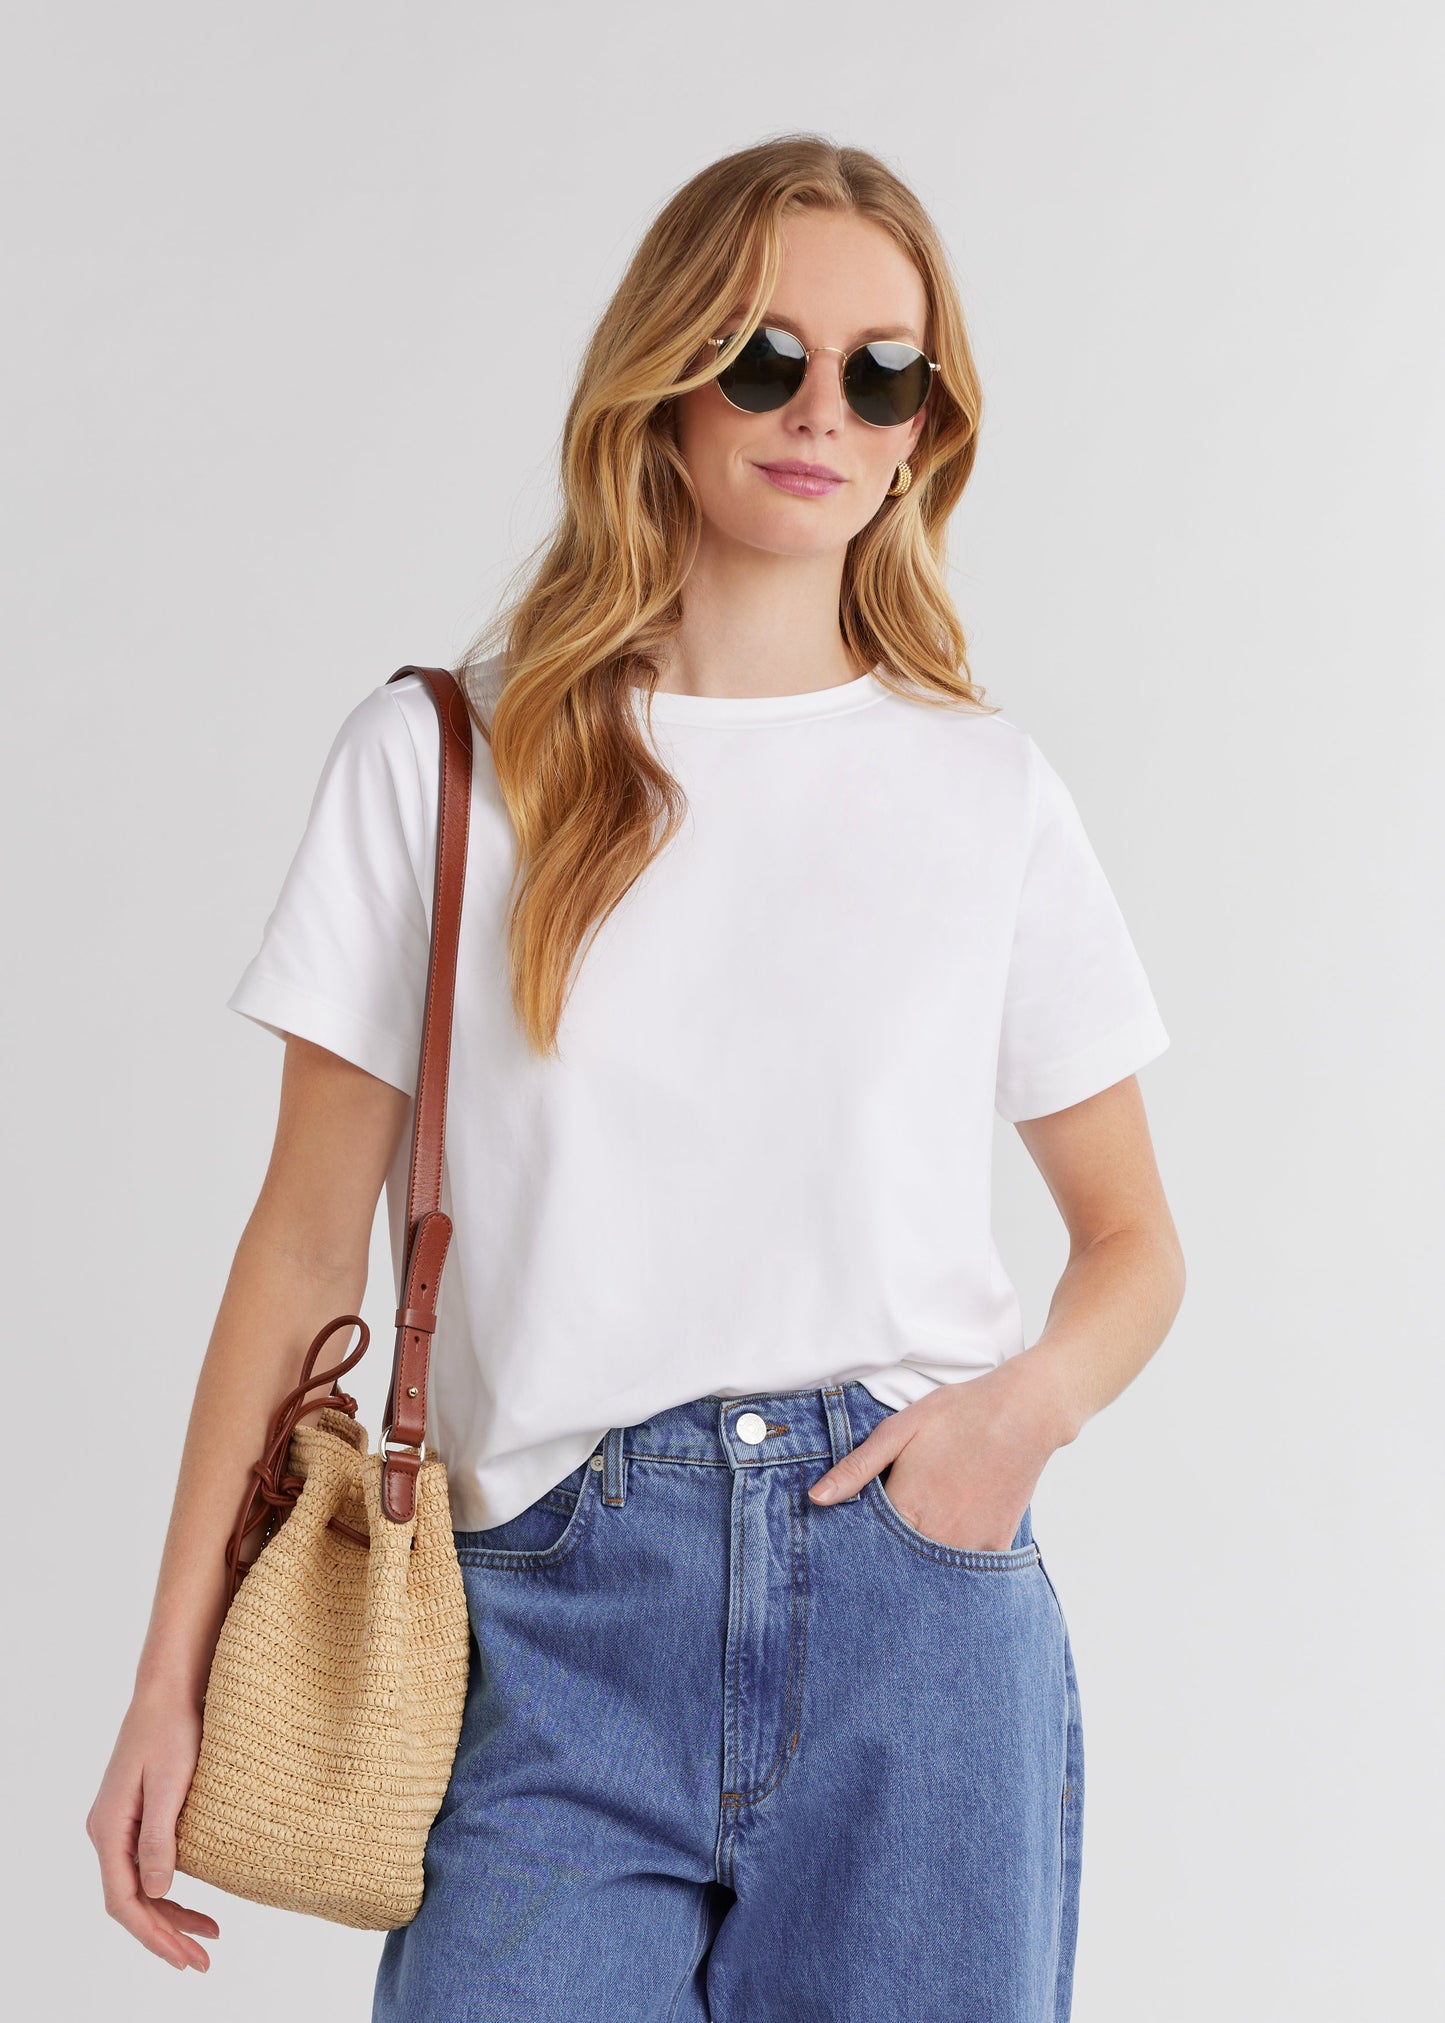 Surfside Crop Tee in Repreve Stretch (White)